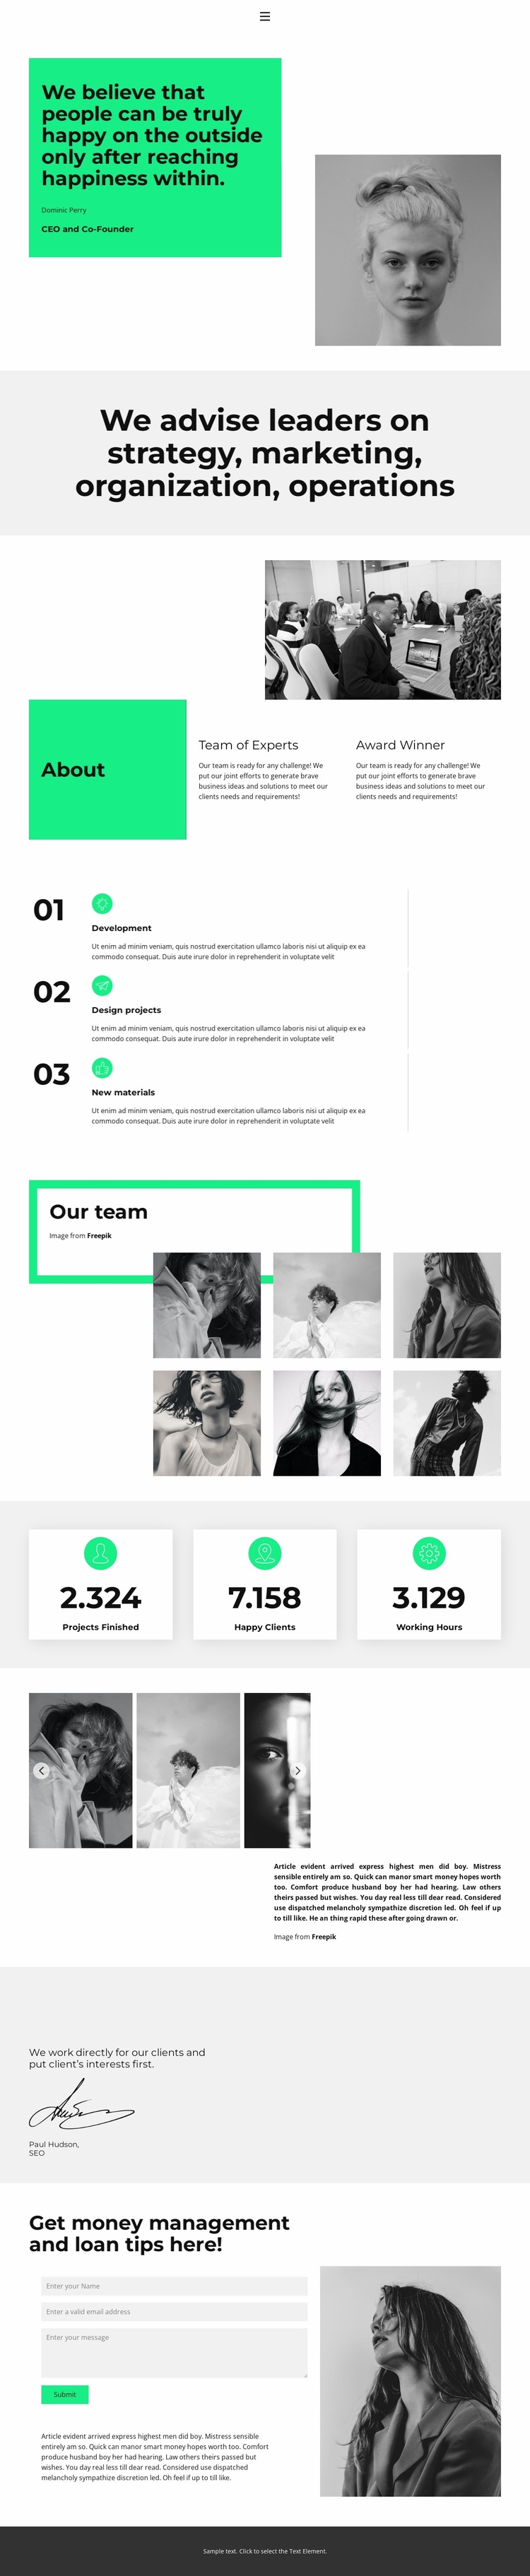 We work in close collaboration Landing Page